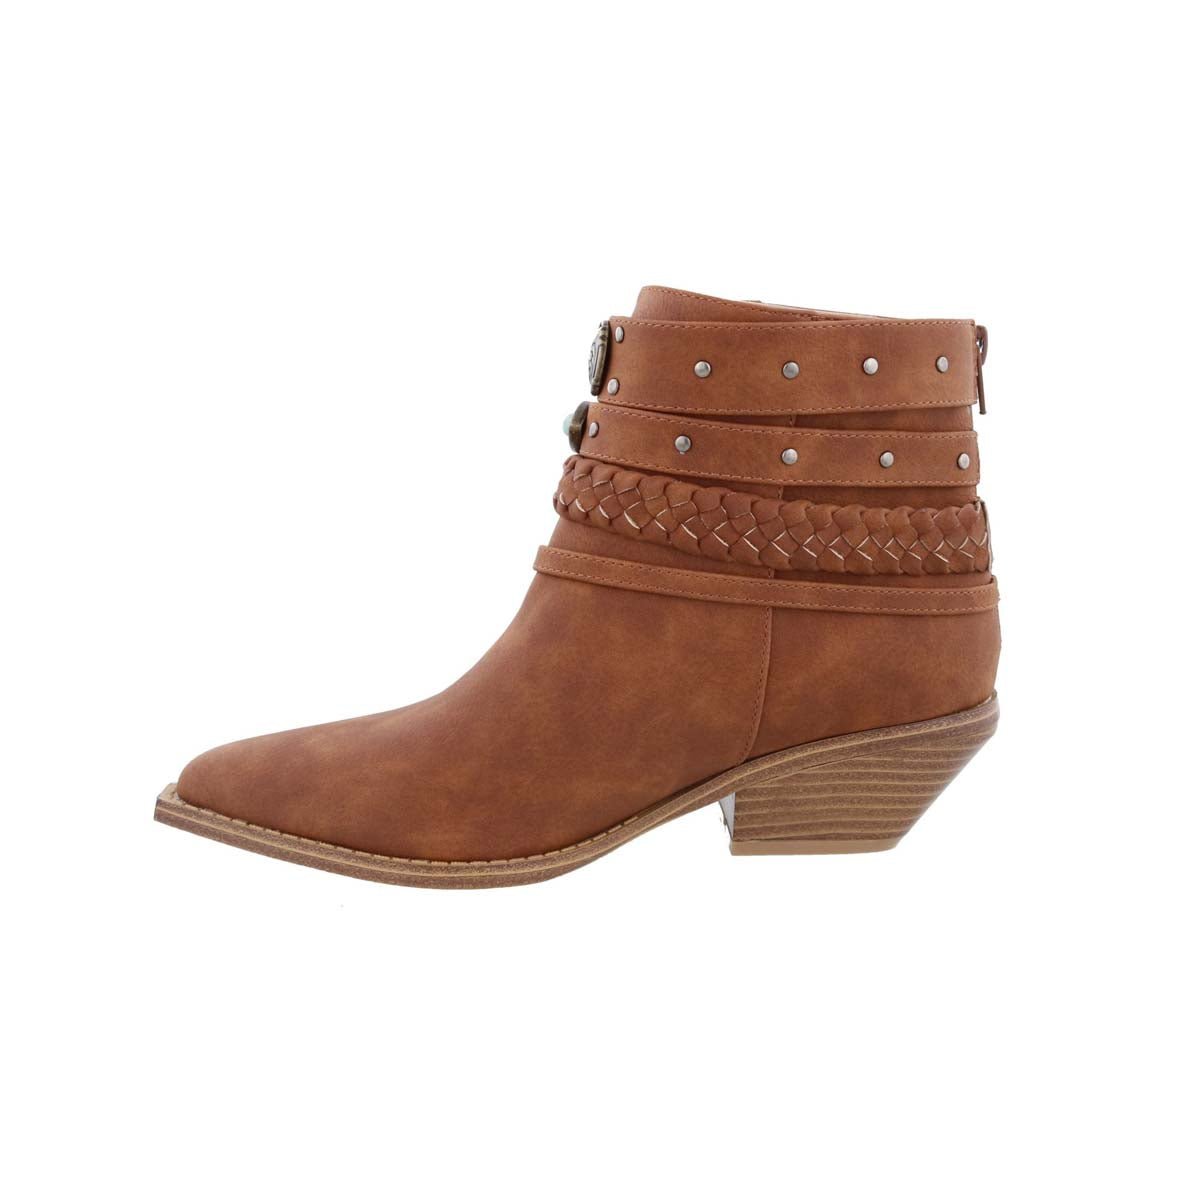 PENNY LOVES KENNY SHANE WOMEN BOOT IN BROWN DISTRESSED SYNTHETIC - TLW Shoes